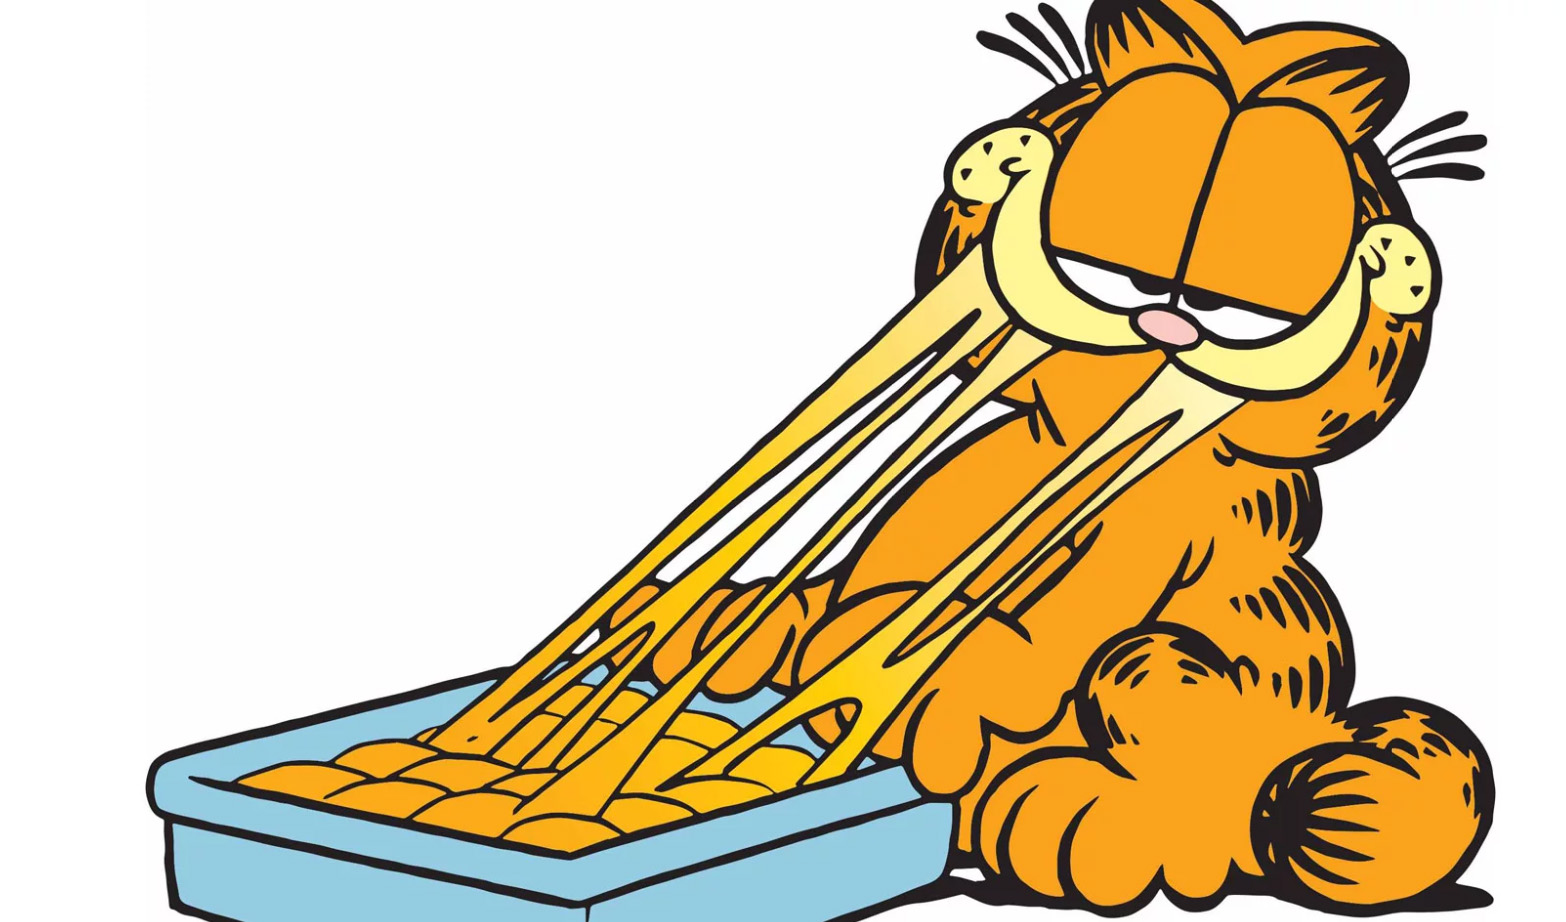 Love Lasagna as Much as Garfield? Let's Celebrate National Lasagna Day.